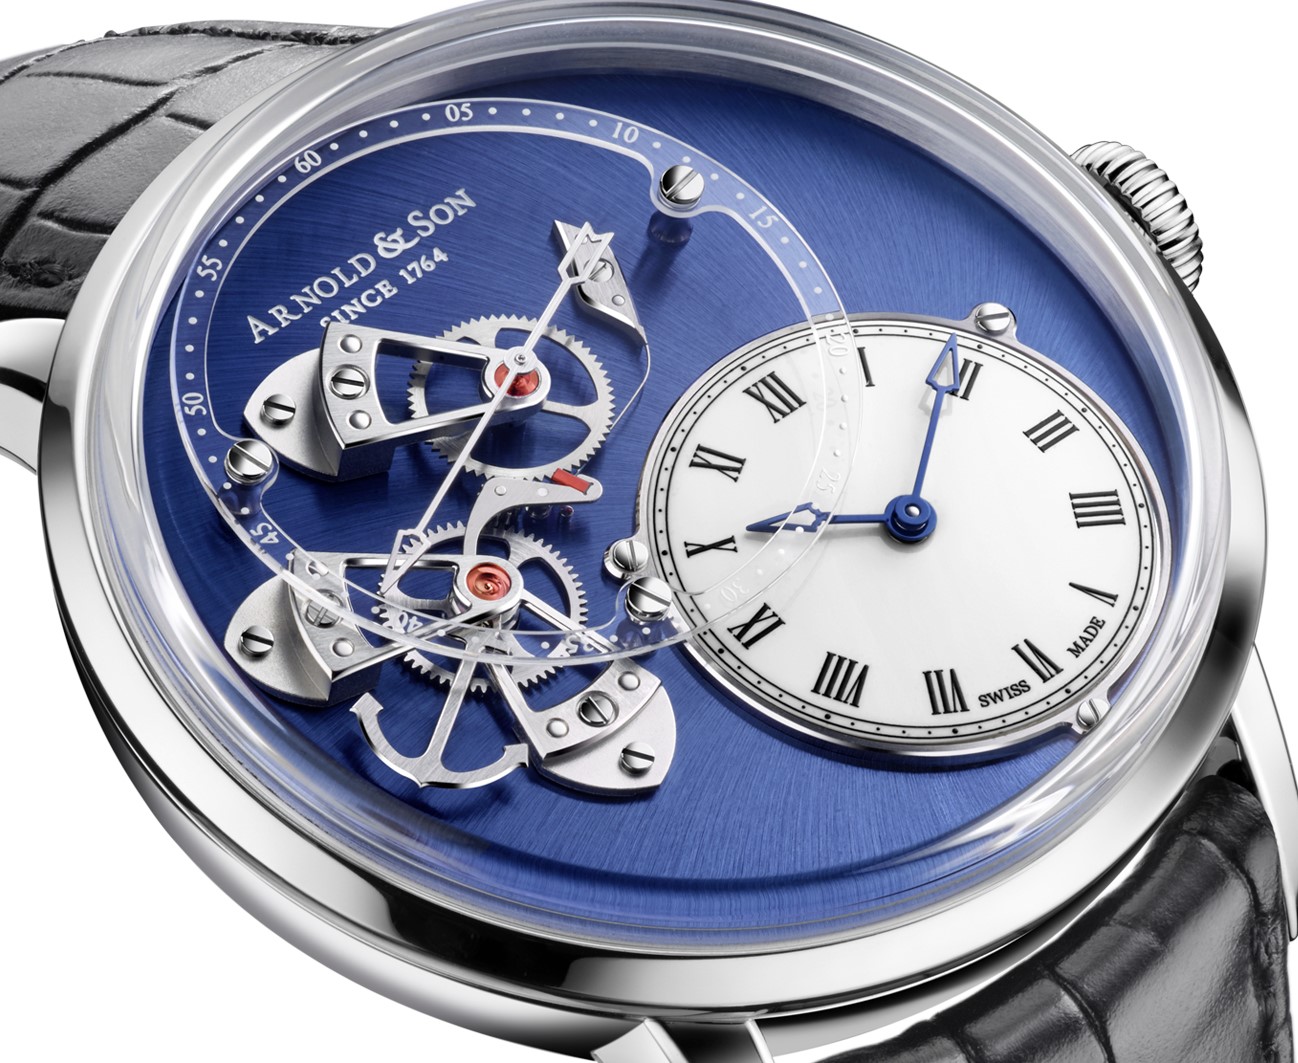  Arnold & Son DSTB Were Launched With Gorgeous Blue-Finished Dial